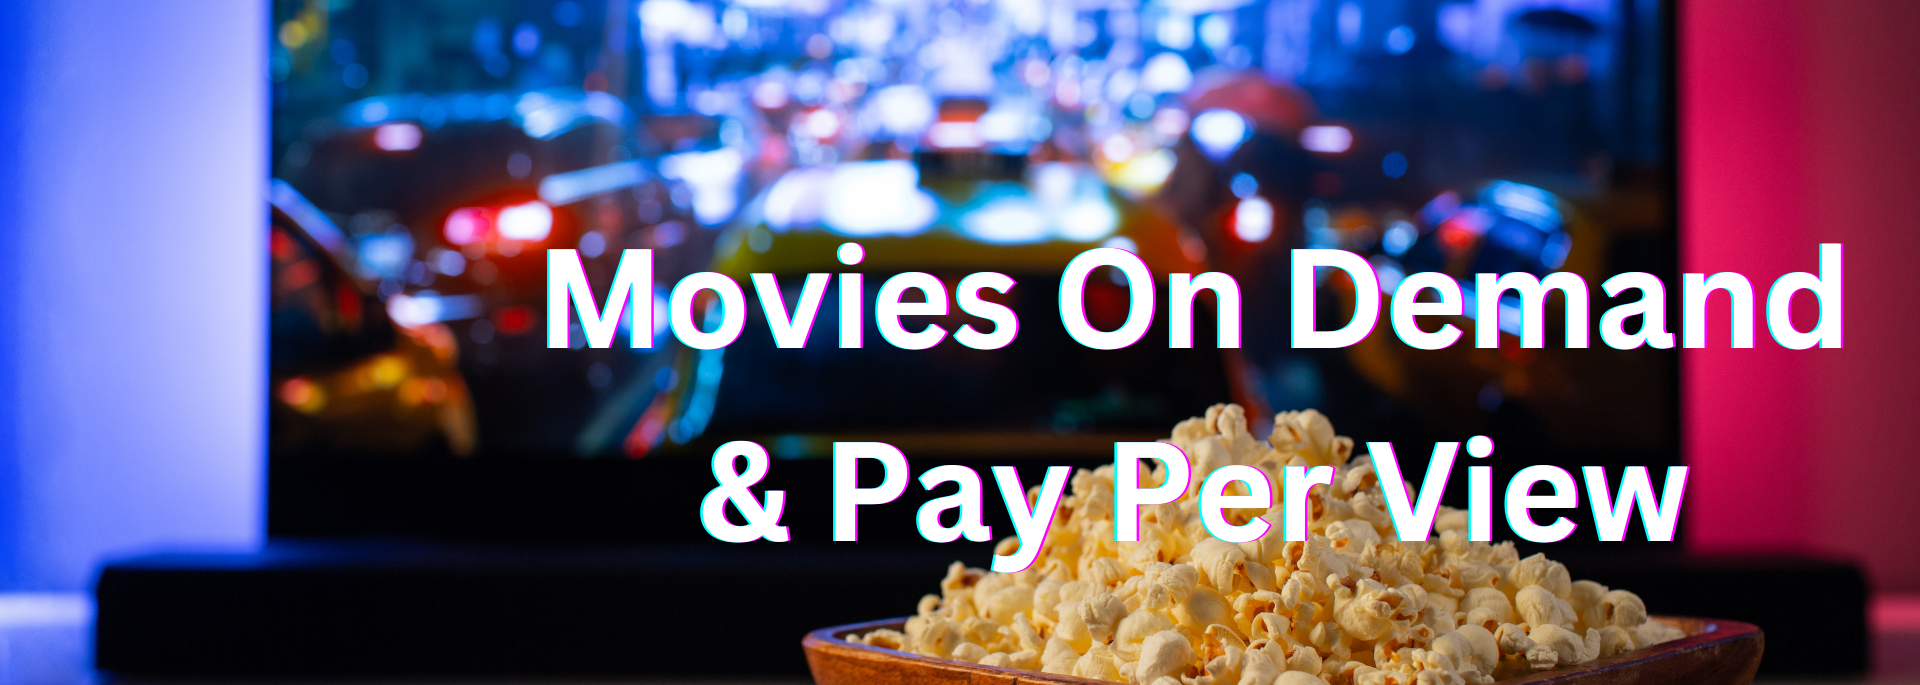 Movies On Demand & Pay Per View